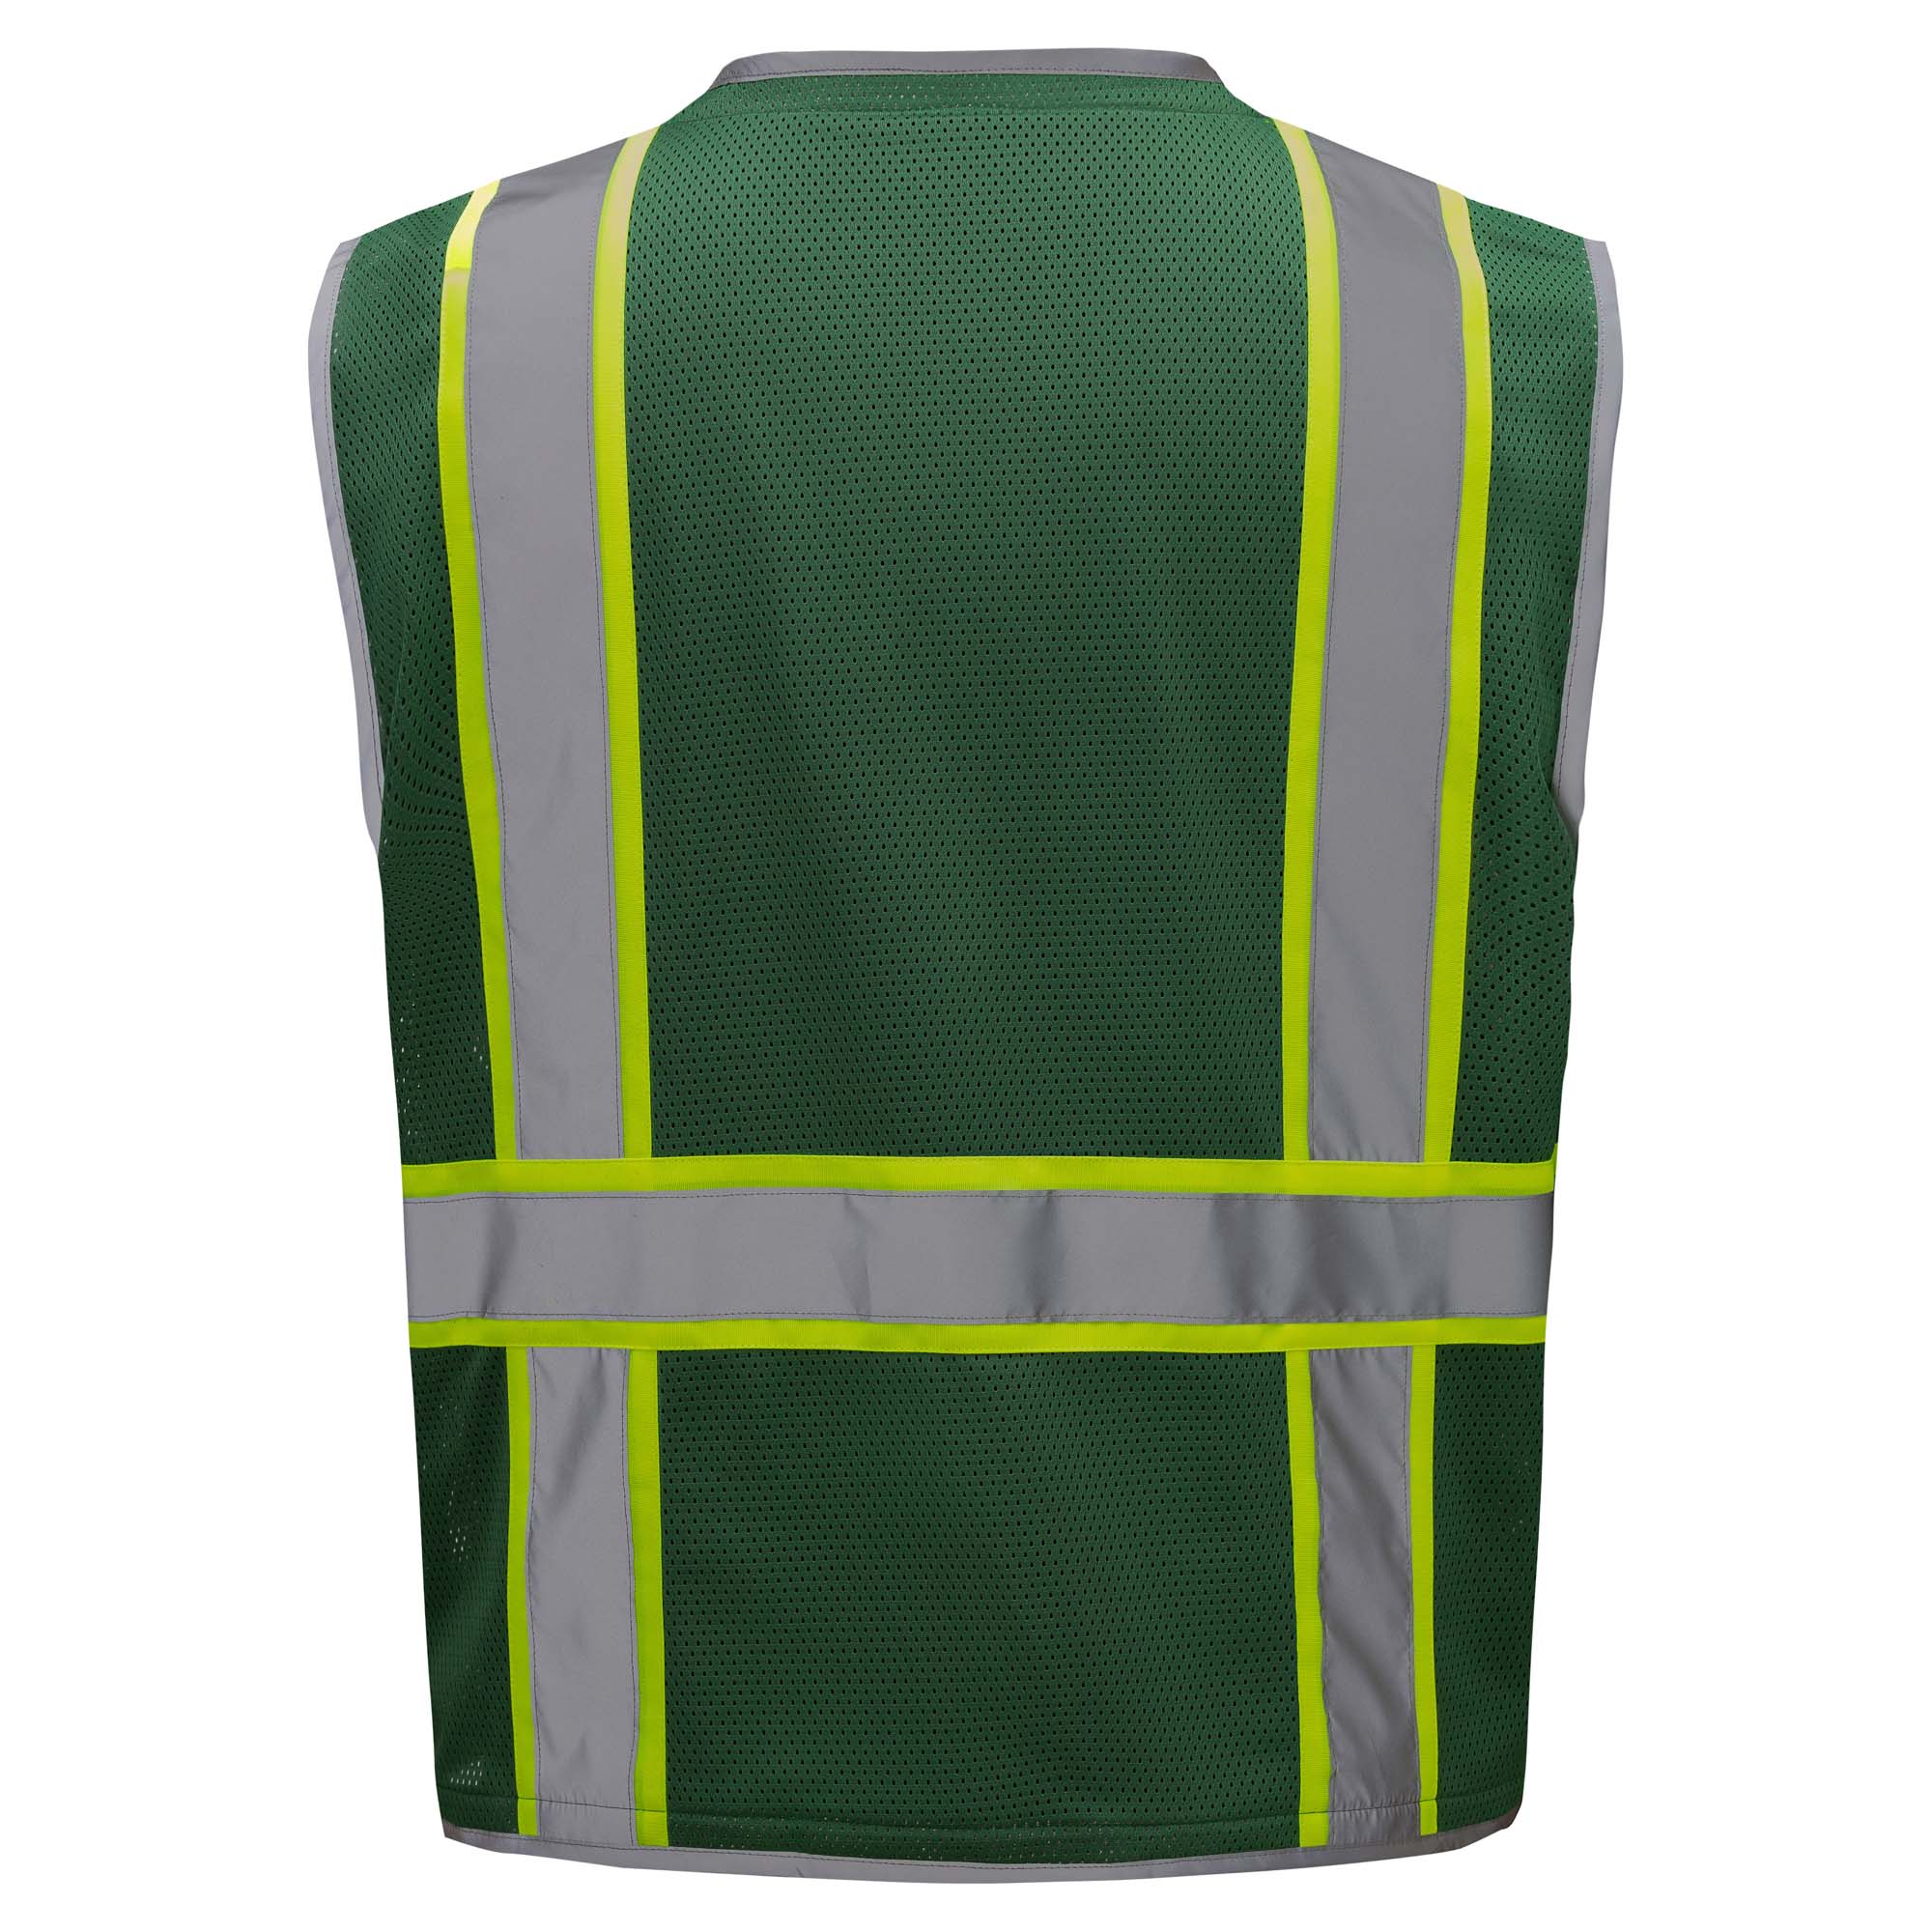 GSS 1718 Hype-Lite Yellow Safety Vest